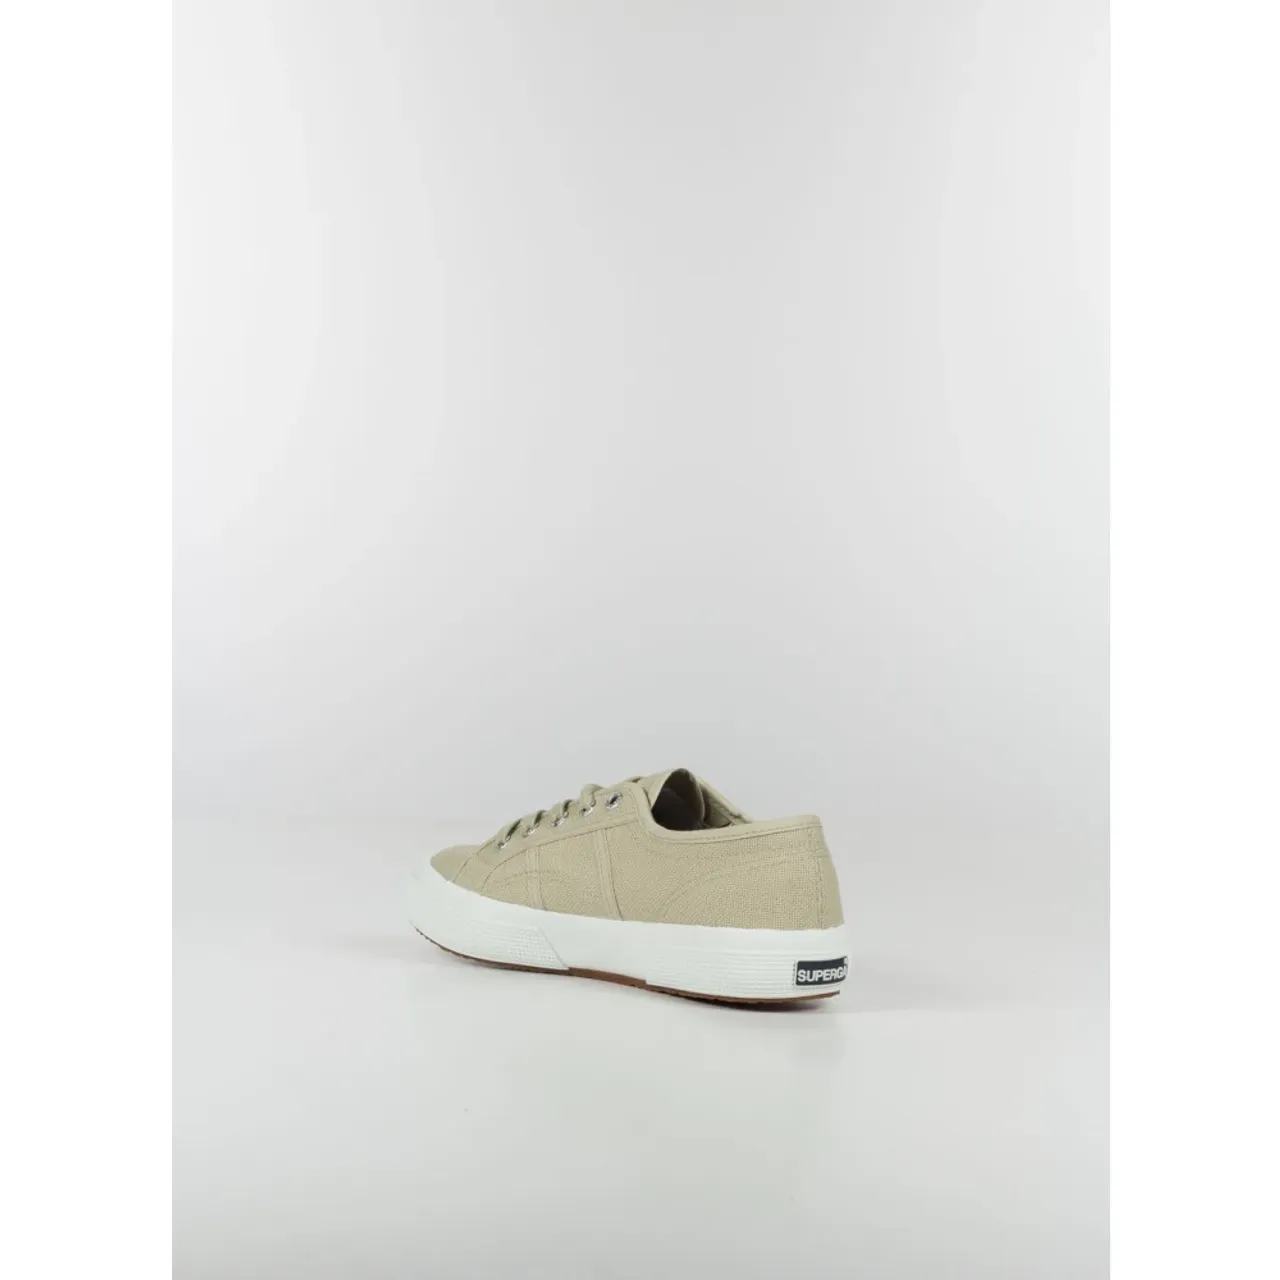 Superga , Classic Canvas Sneakers ,Beige male, Sizes: